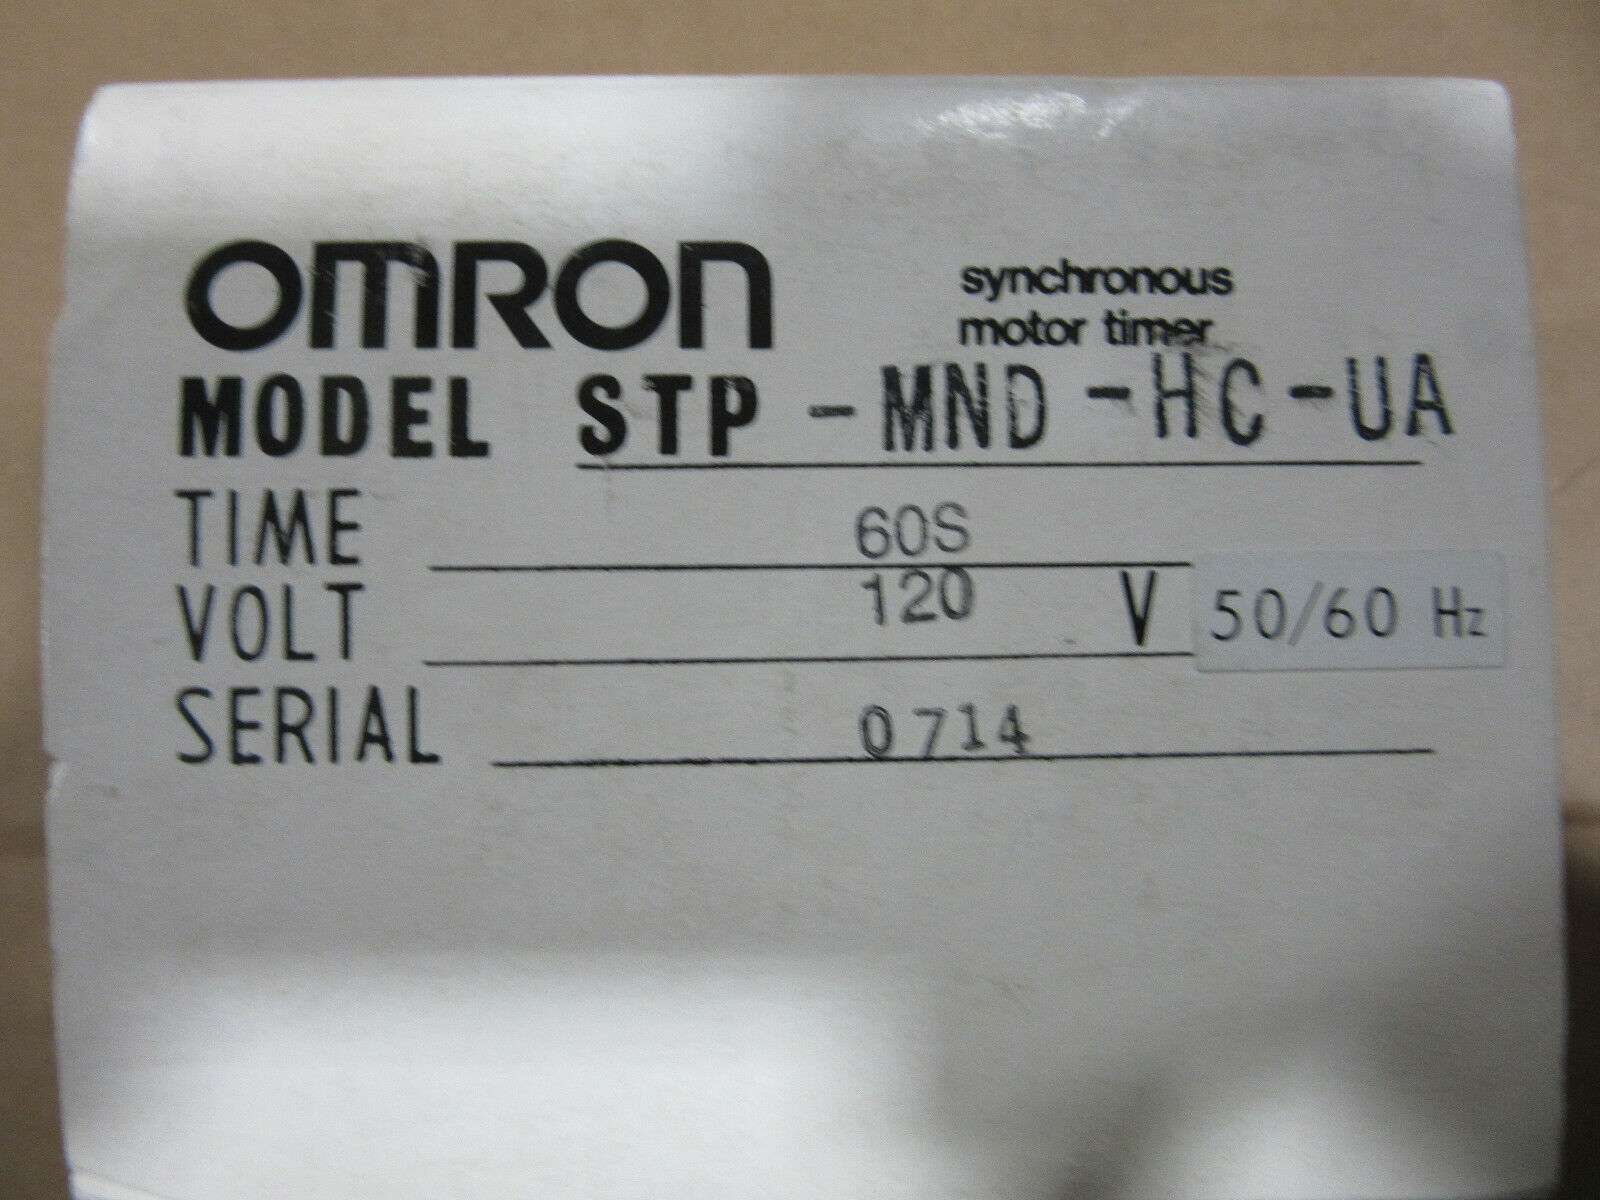 Omron STP-MND-HC-UA Synchronous Motor Timer 60S 120V NEW!!! in F